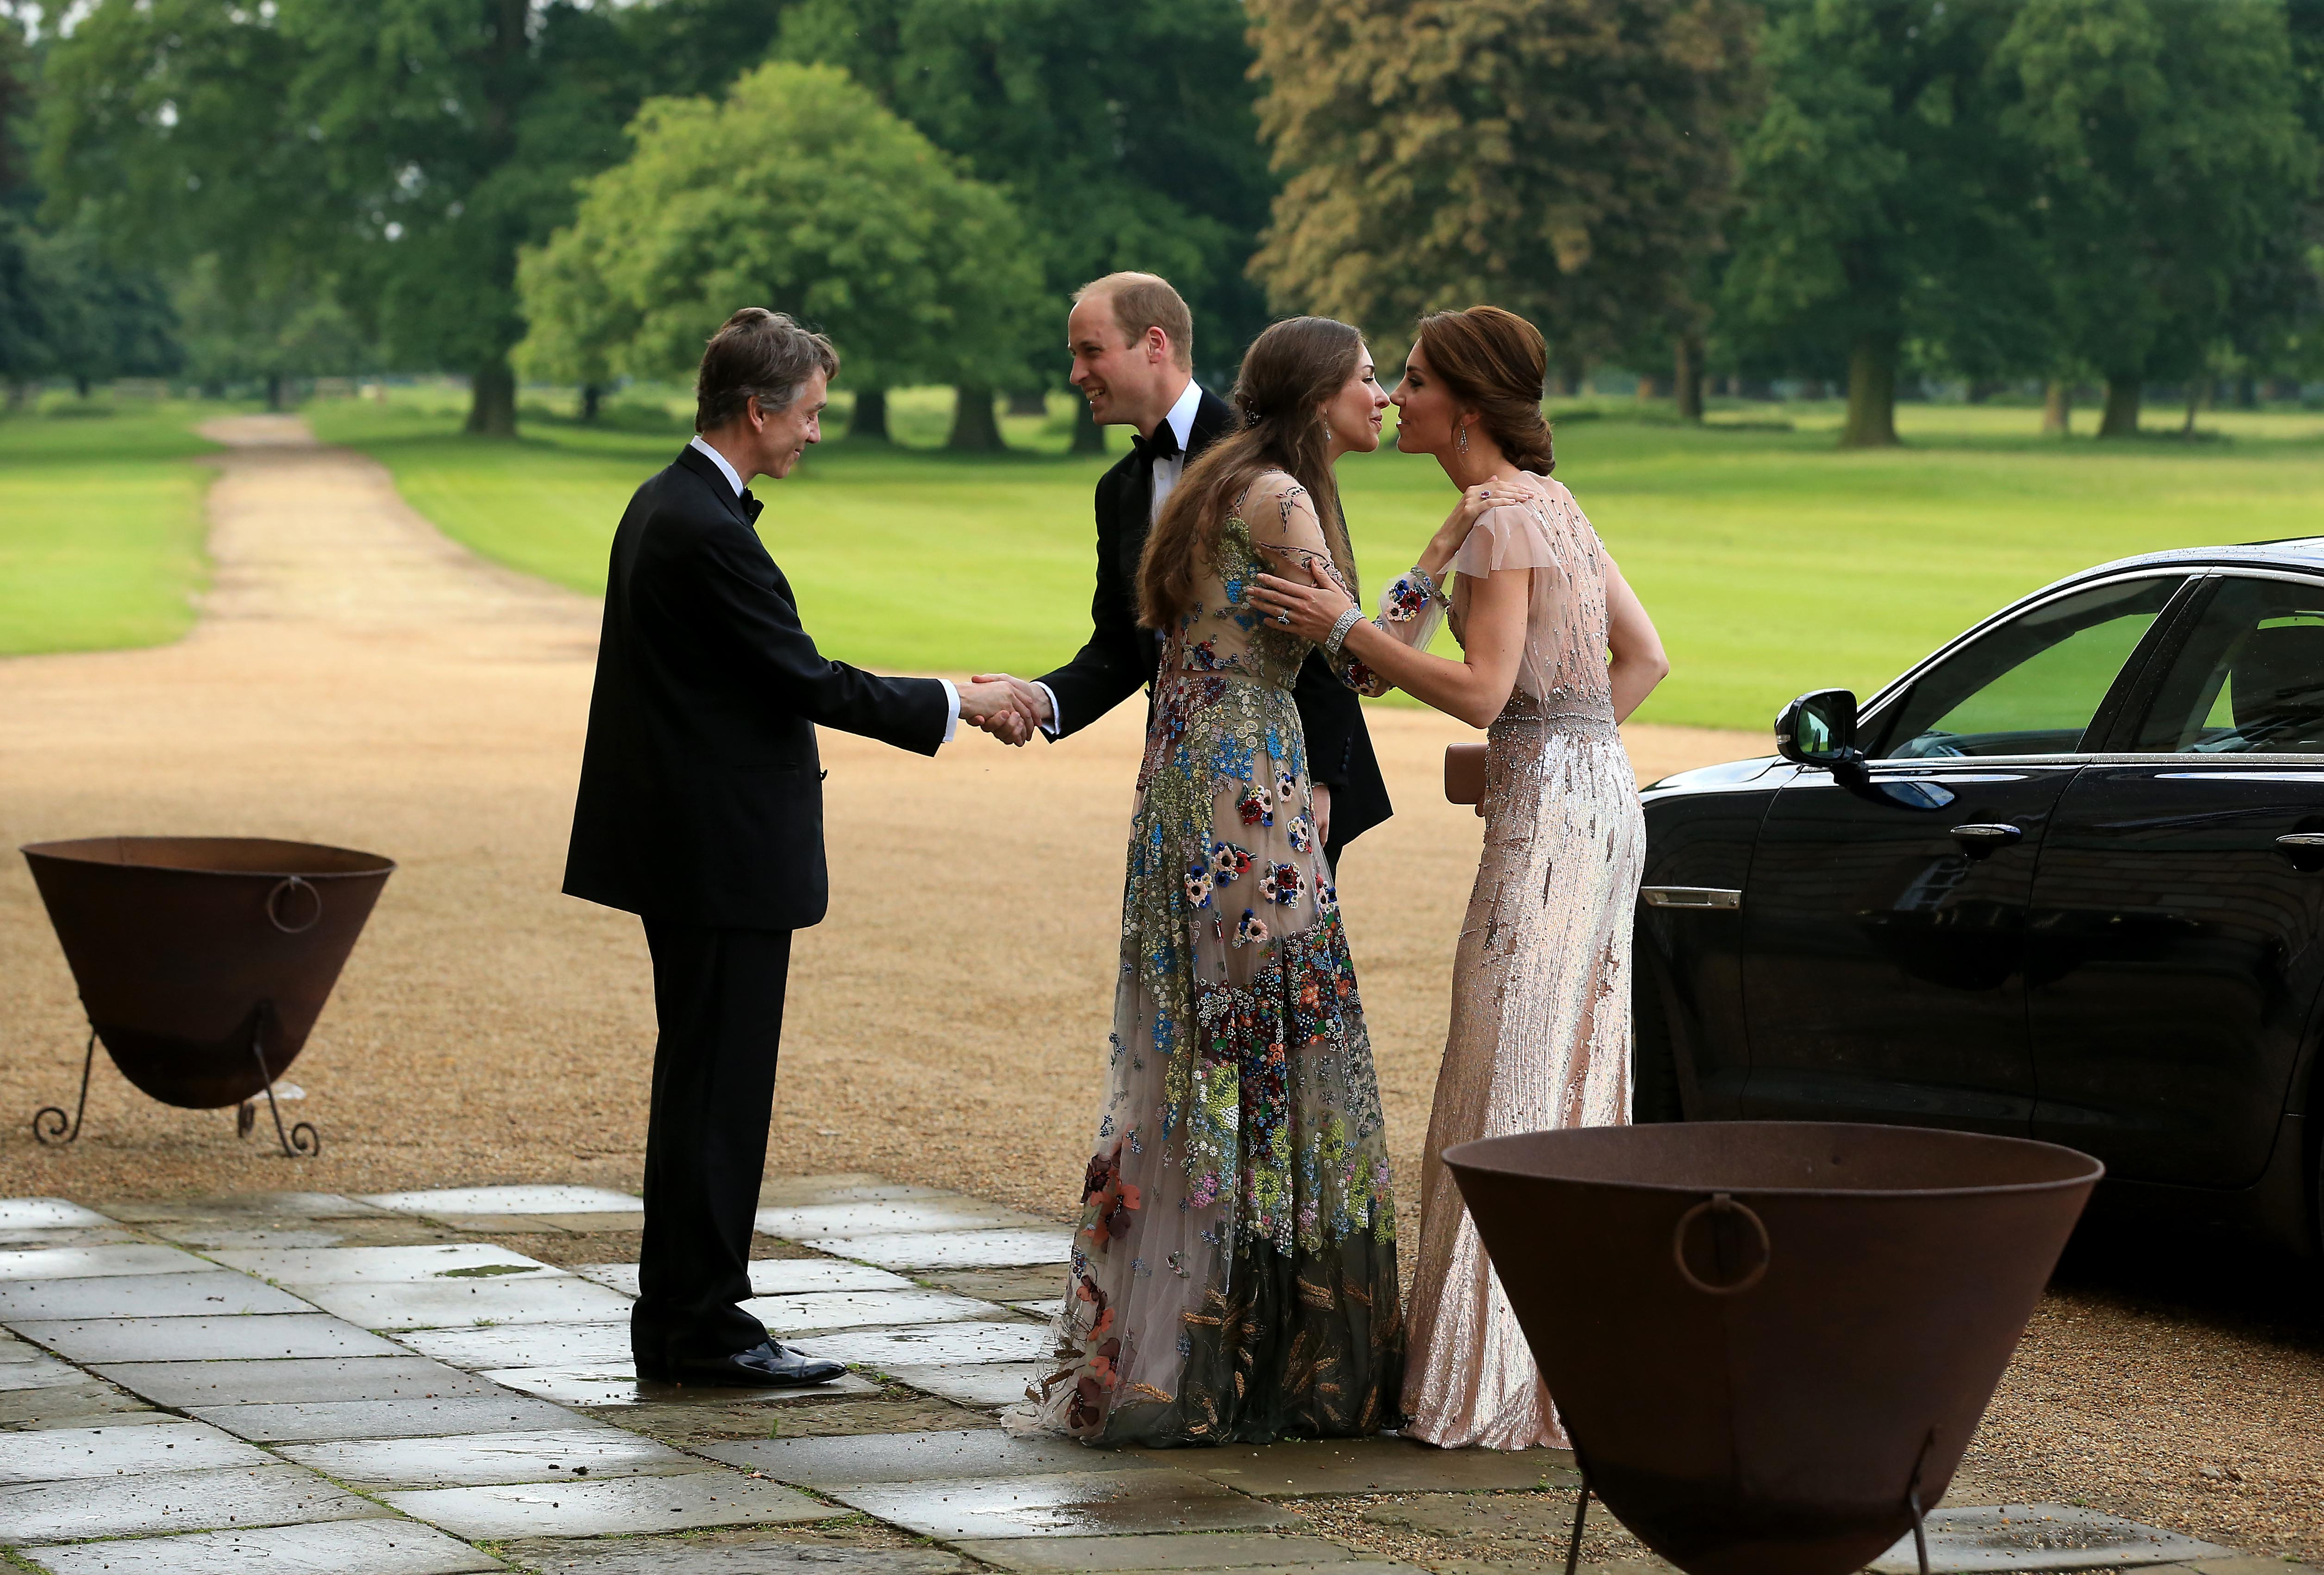 Prince William and Catherine, Duchess of Cambridge are greeted by David Cholmondeley, Marquess of Cholmondeley and Rose Cholmondeley, the Marchioness of Cholmondeley at a gala dinner on June 22, 2016 in King's Lynn, England | Source: Getty Images